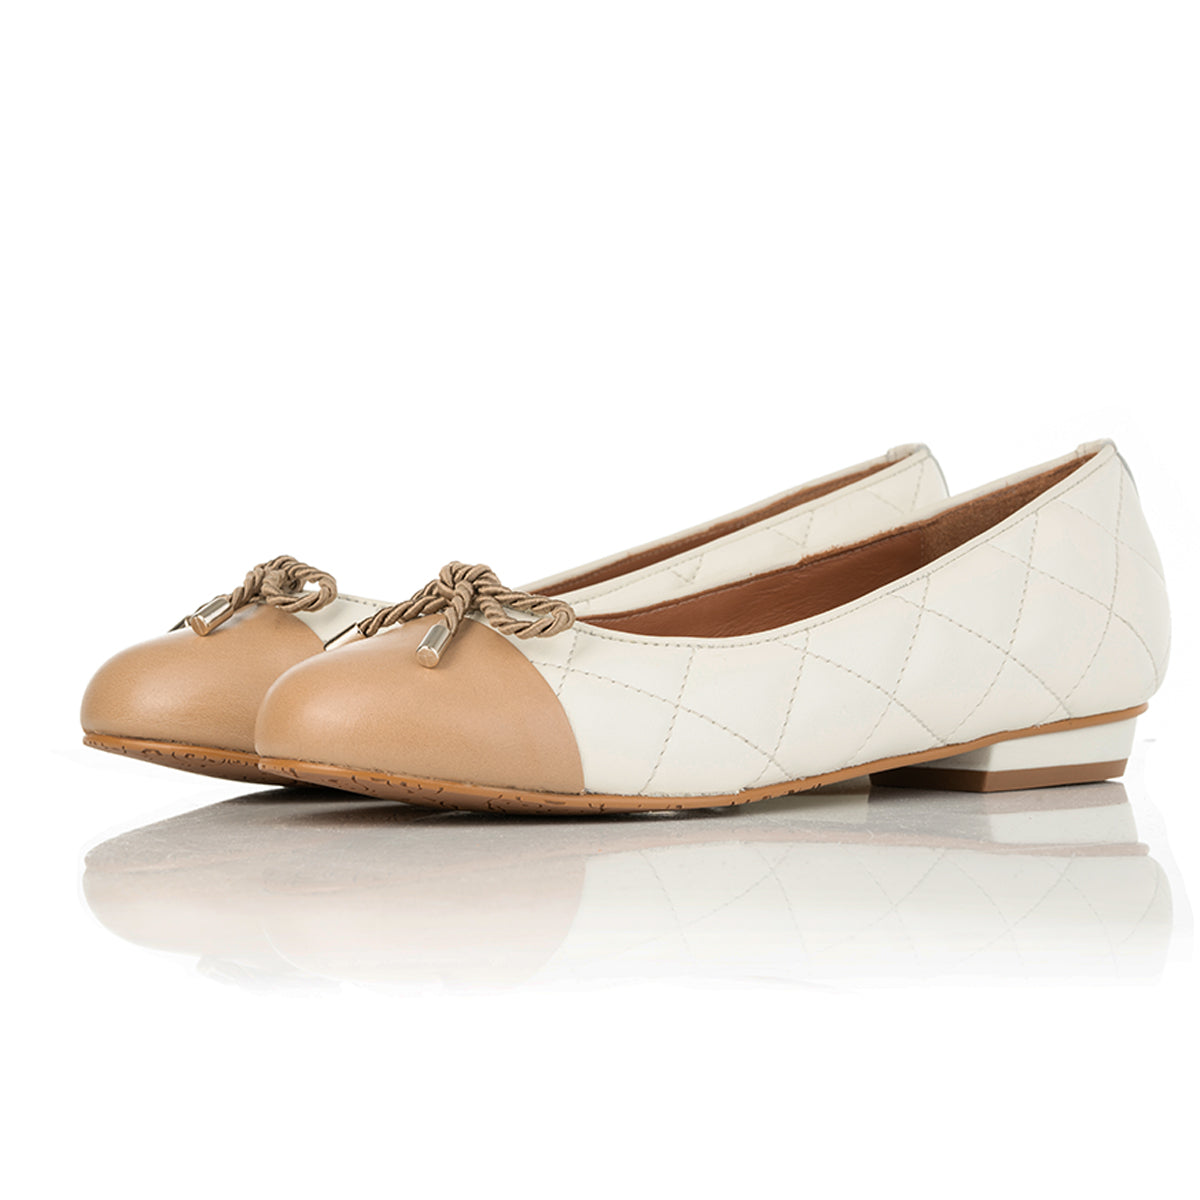 Chanel Ballet Flats - 51 For Sale on 1stDibs